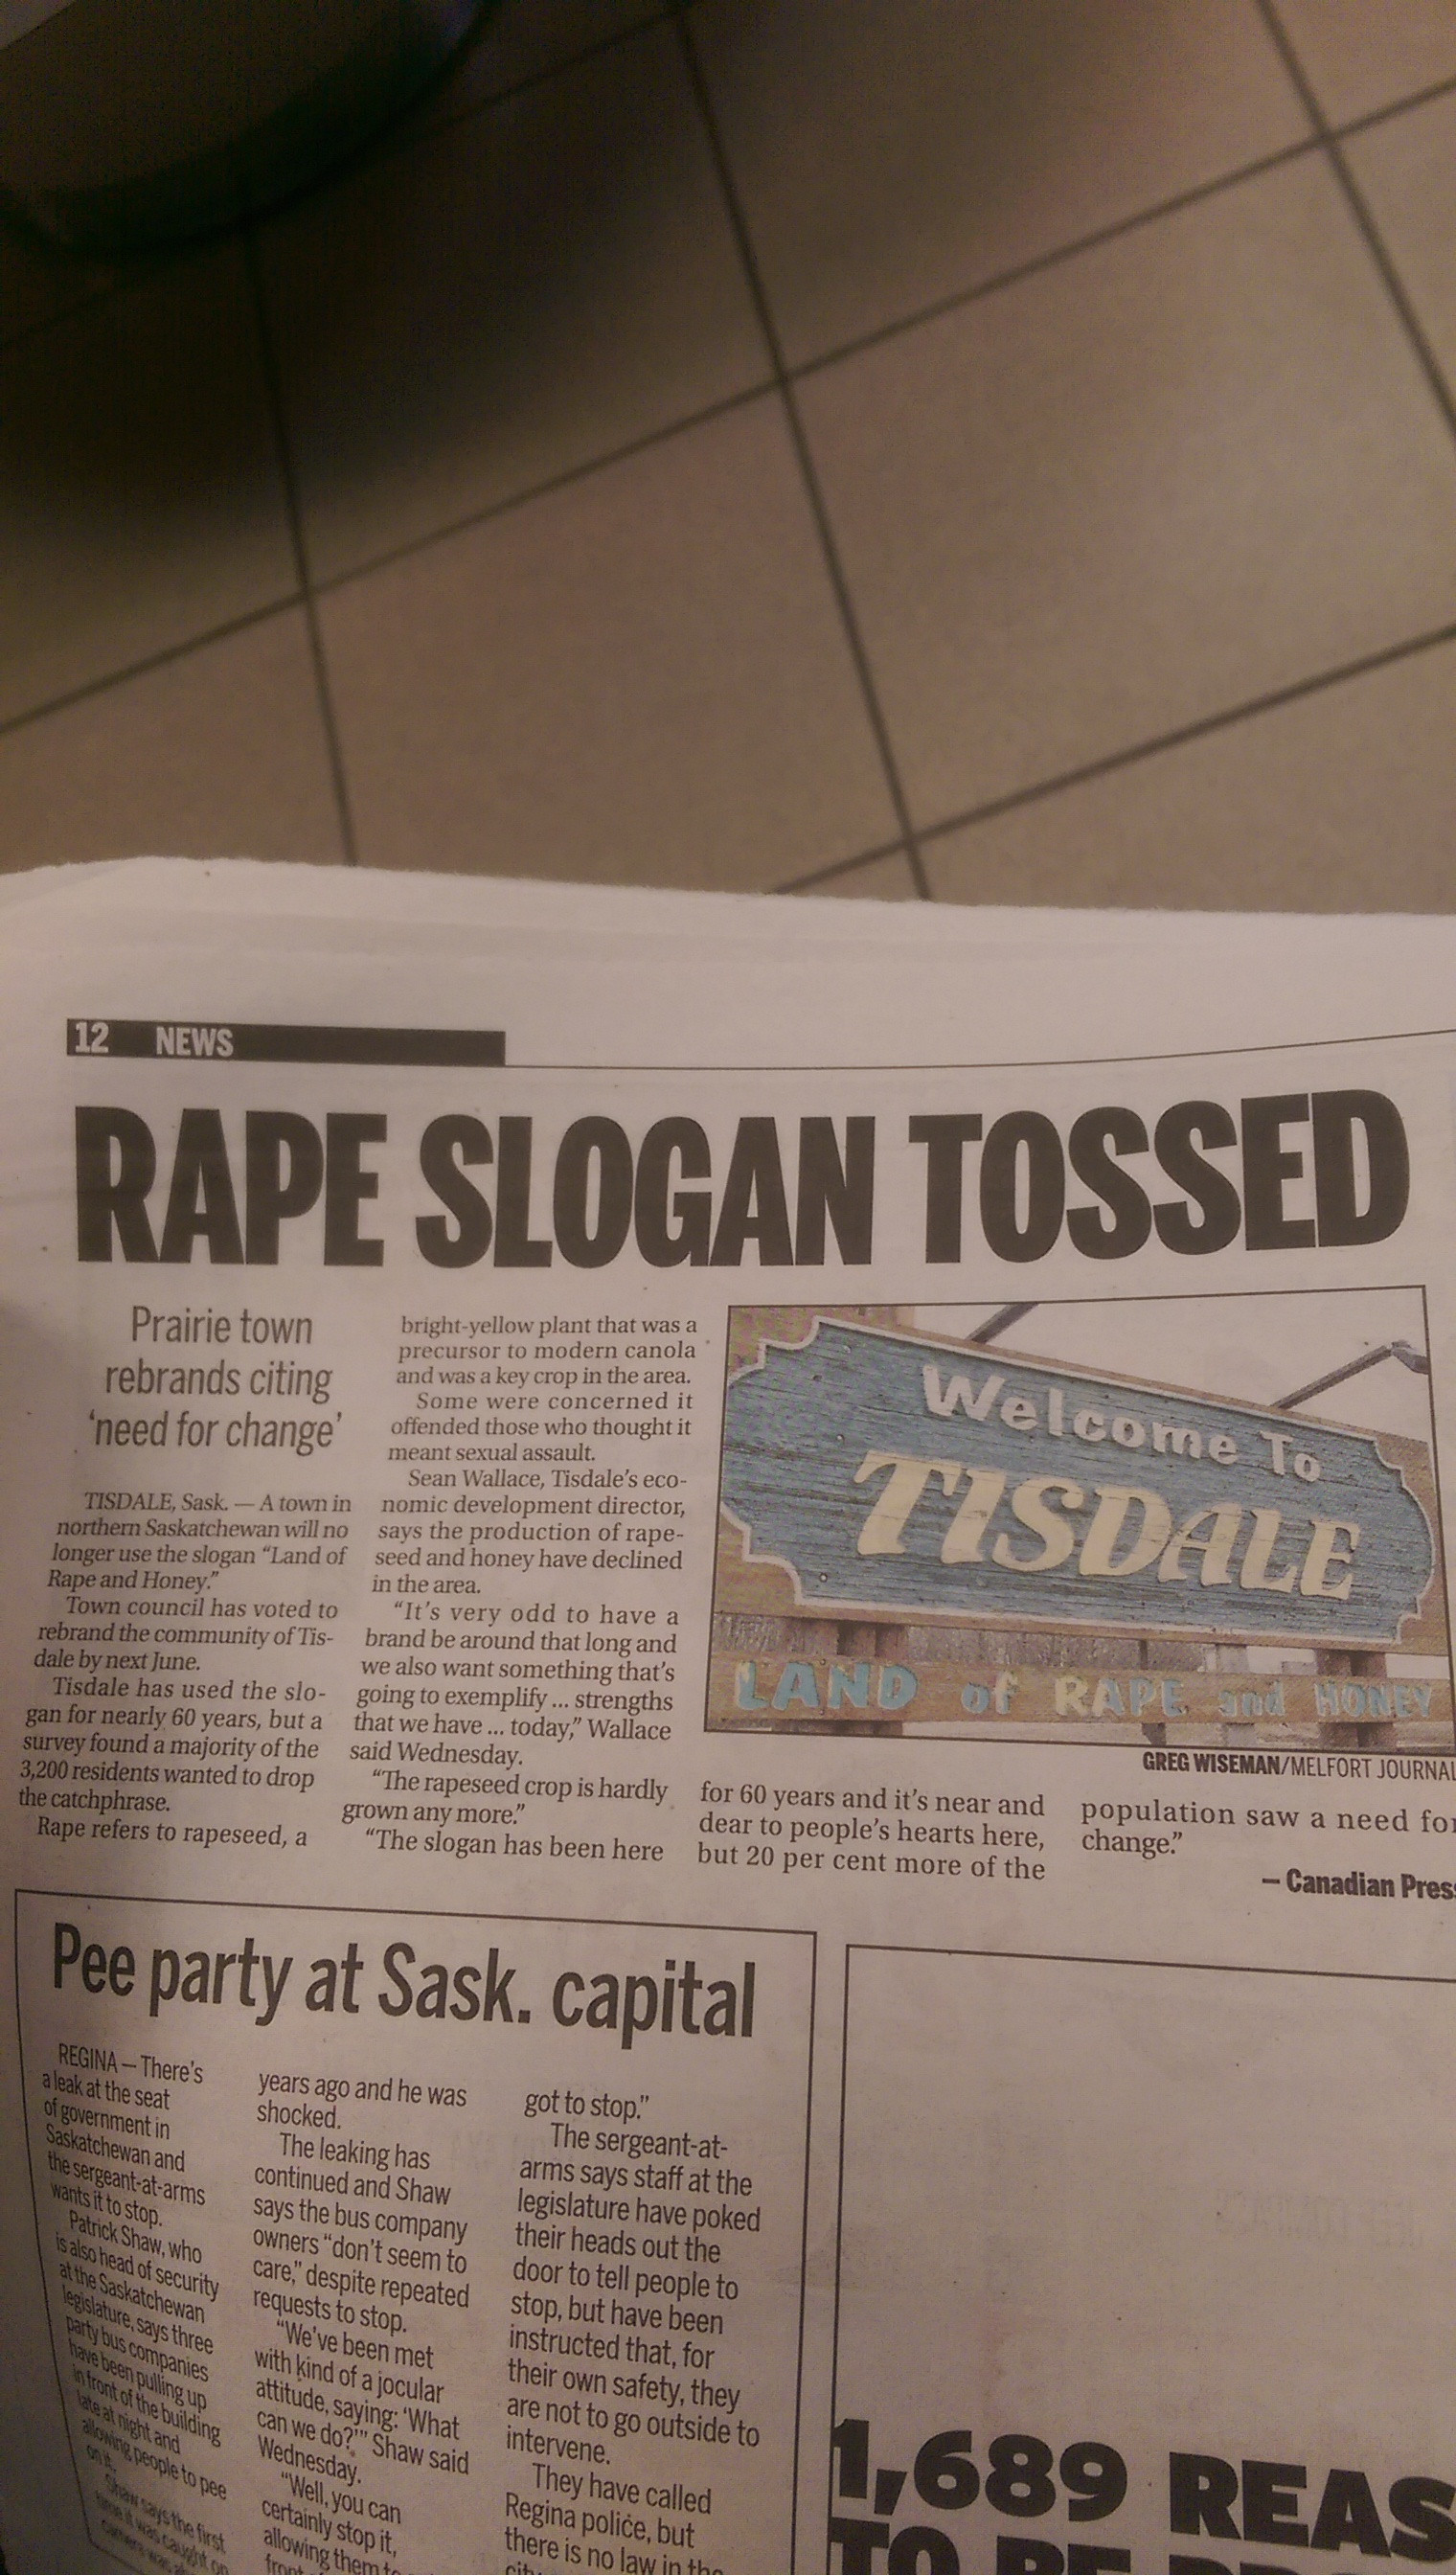 newspaper - Le Rape Slogan Tossed mbrandt Te for change Welcome to Twisdale ned Pee party at Sask. capital 1,689 Reas